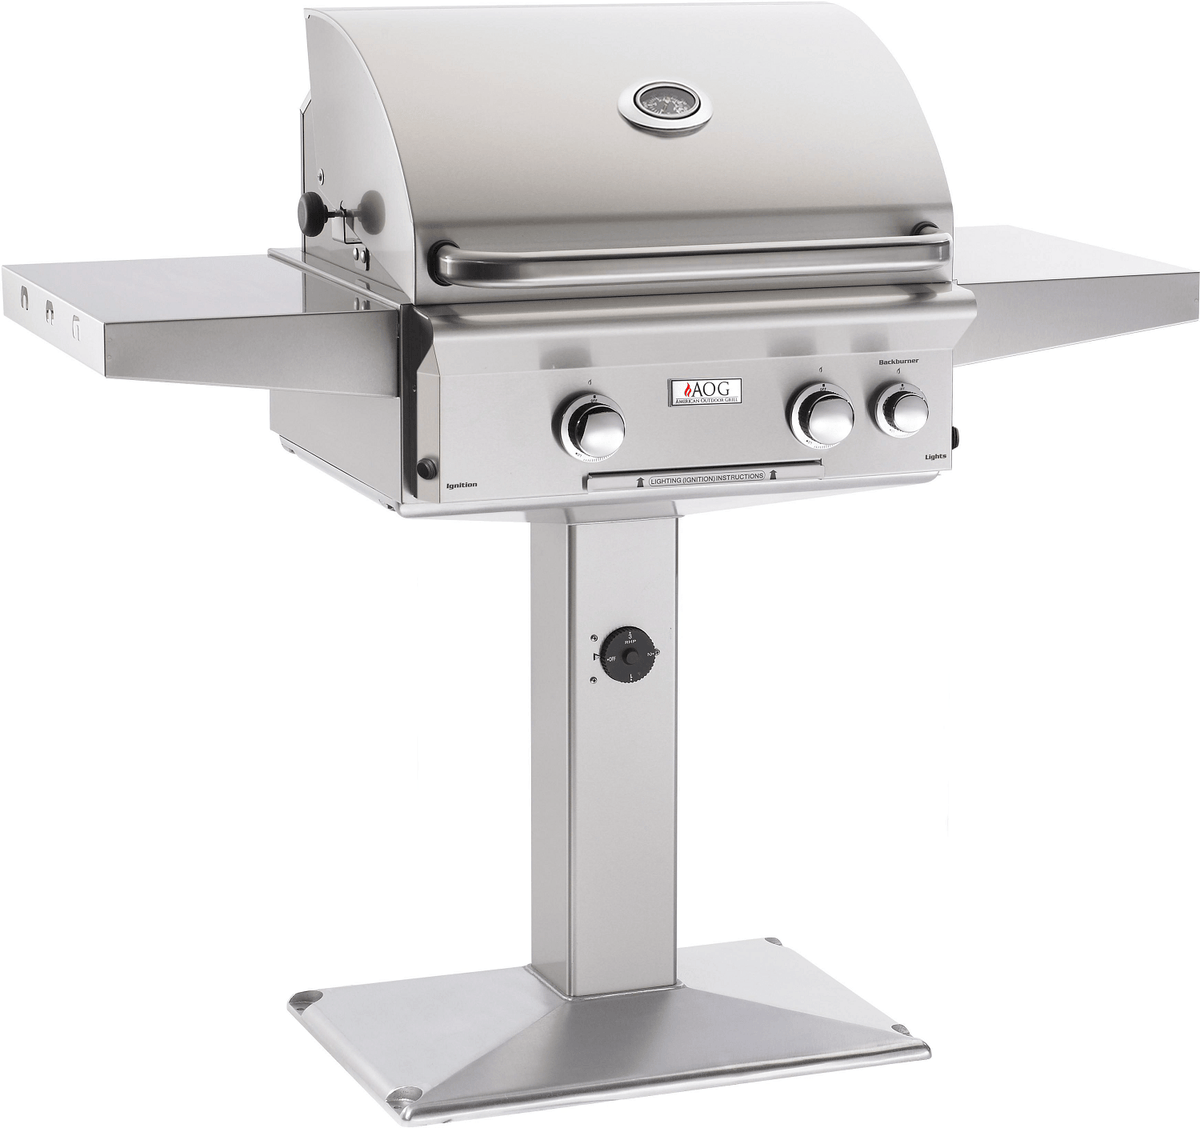 American Outdoor Grill Grills Patio Post Mount Grill American Outdoor Grill L-Series 24” Post Mount Gas Grill / Patio or In-Ground, Optional Sear Burner / 24NPL-00SP or 24NGL-00SP